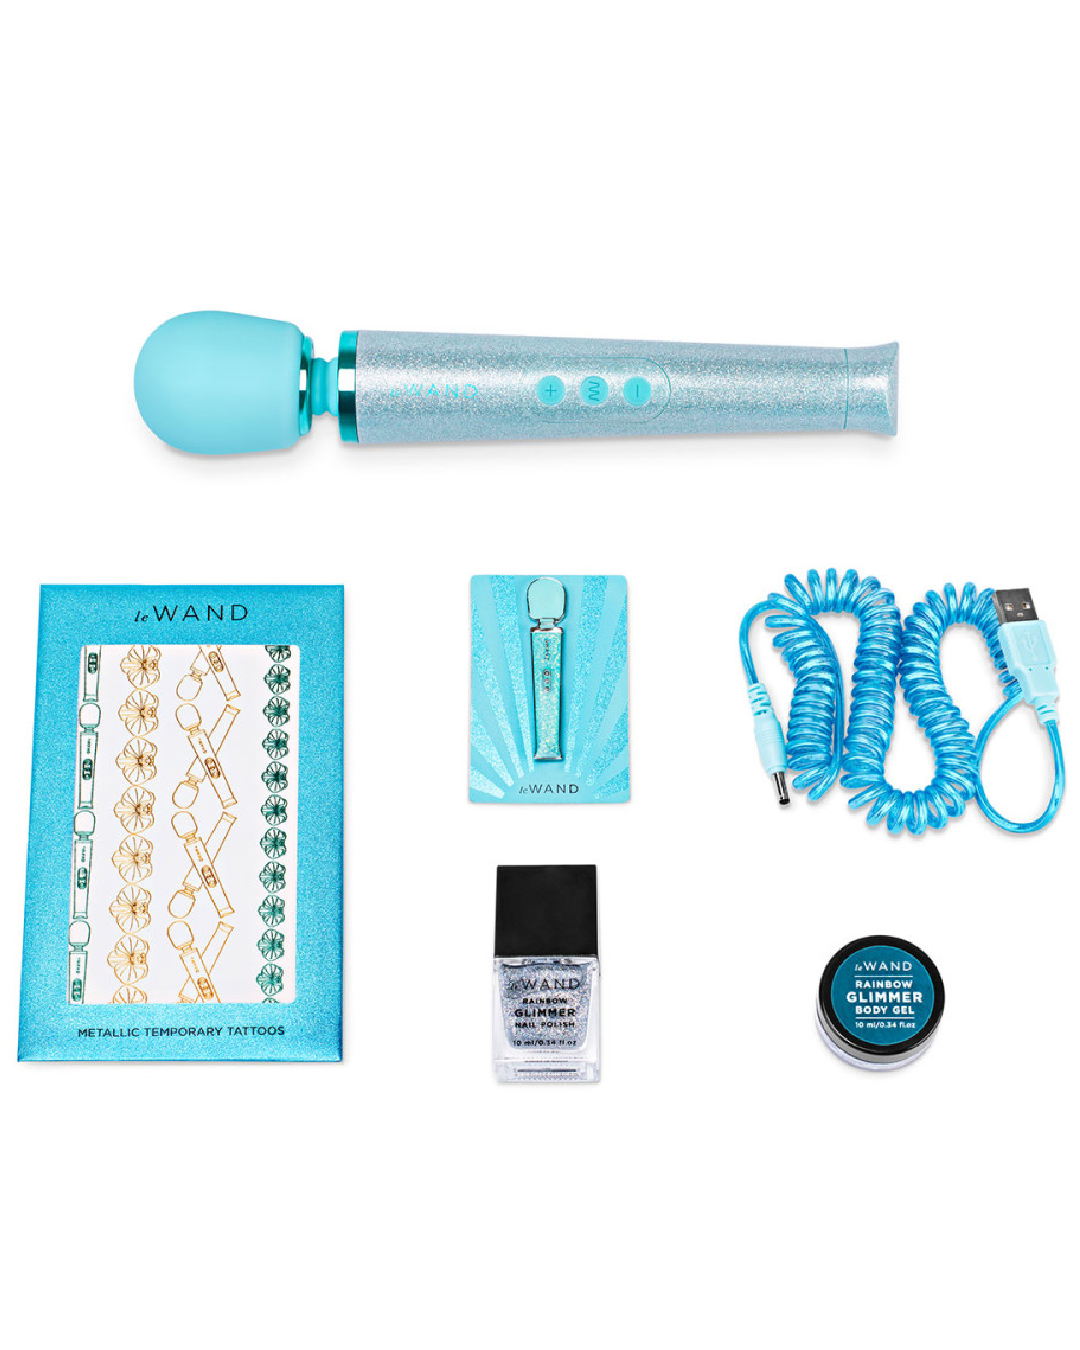 Le Wand All That Glimmers Wand Vibrator Set - Blue with accessories 